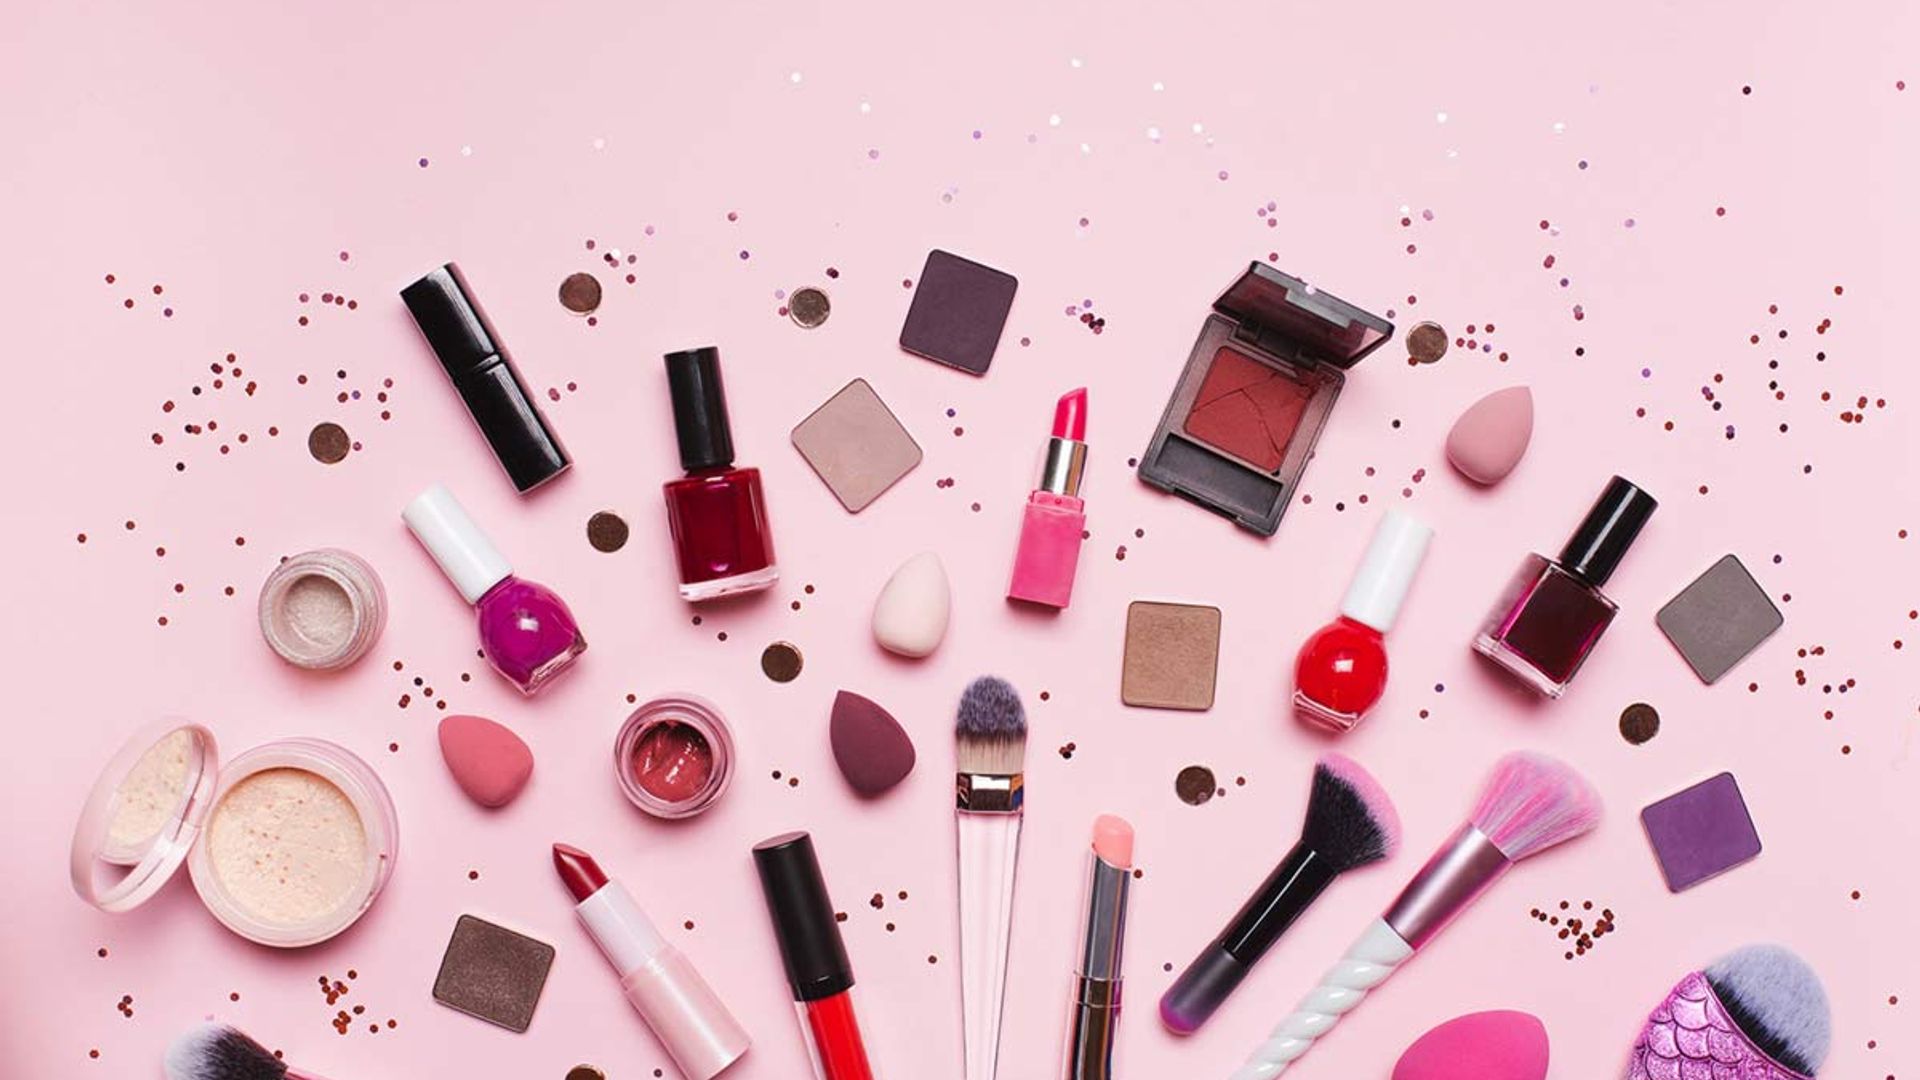 10 best makeup organisers 2021: how to store your cosmetics the right way